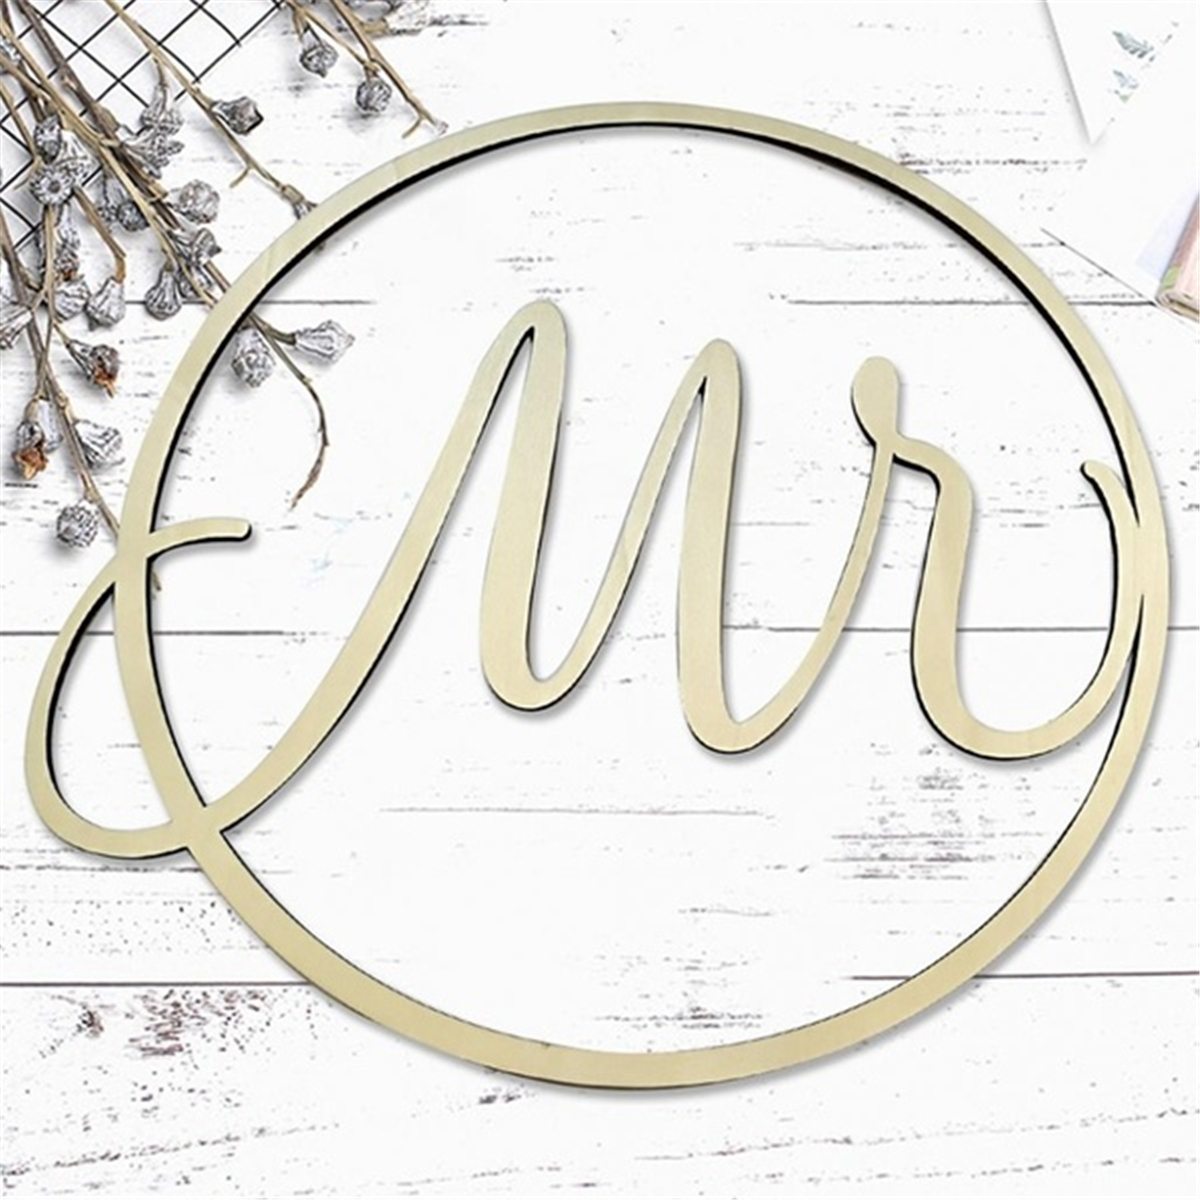 Mr-amp-Mrs-Wedding-Chair-Signs-Floral-HoopCalligraphy-Wooden-Hanging-Circle-Set-Decor-Supplies-1445385